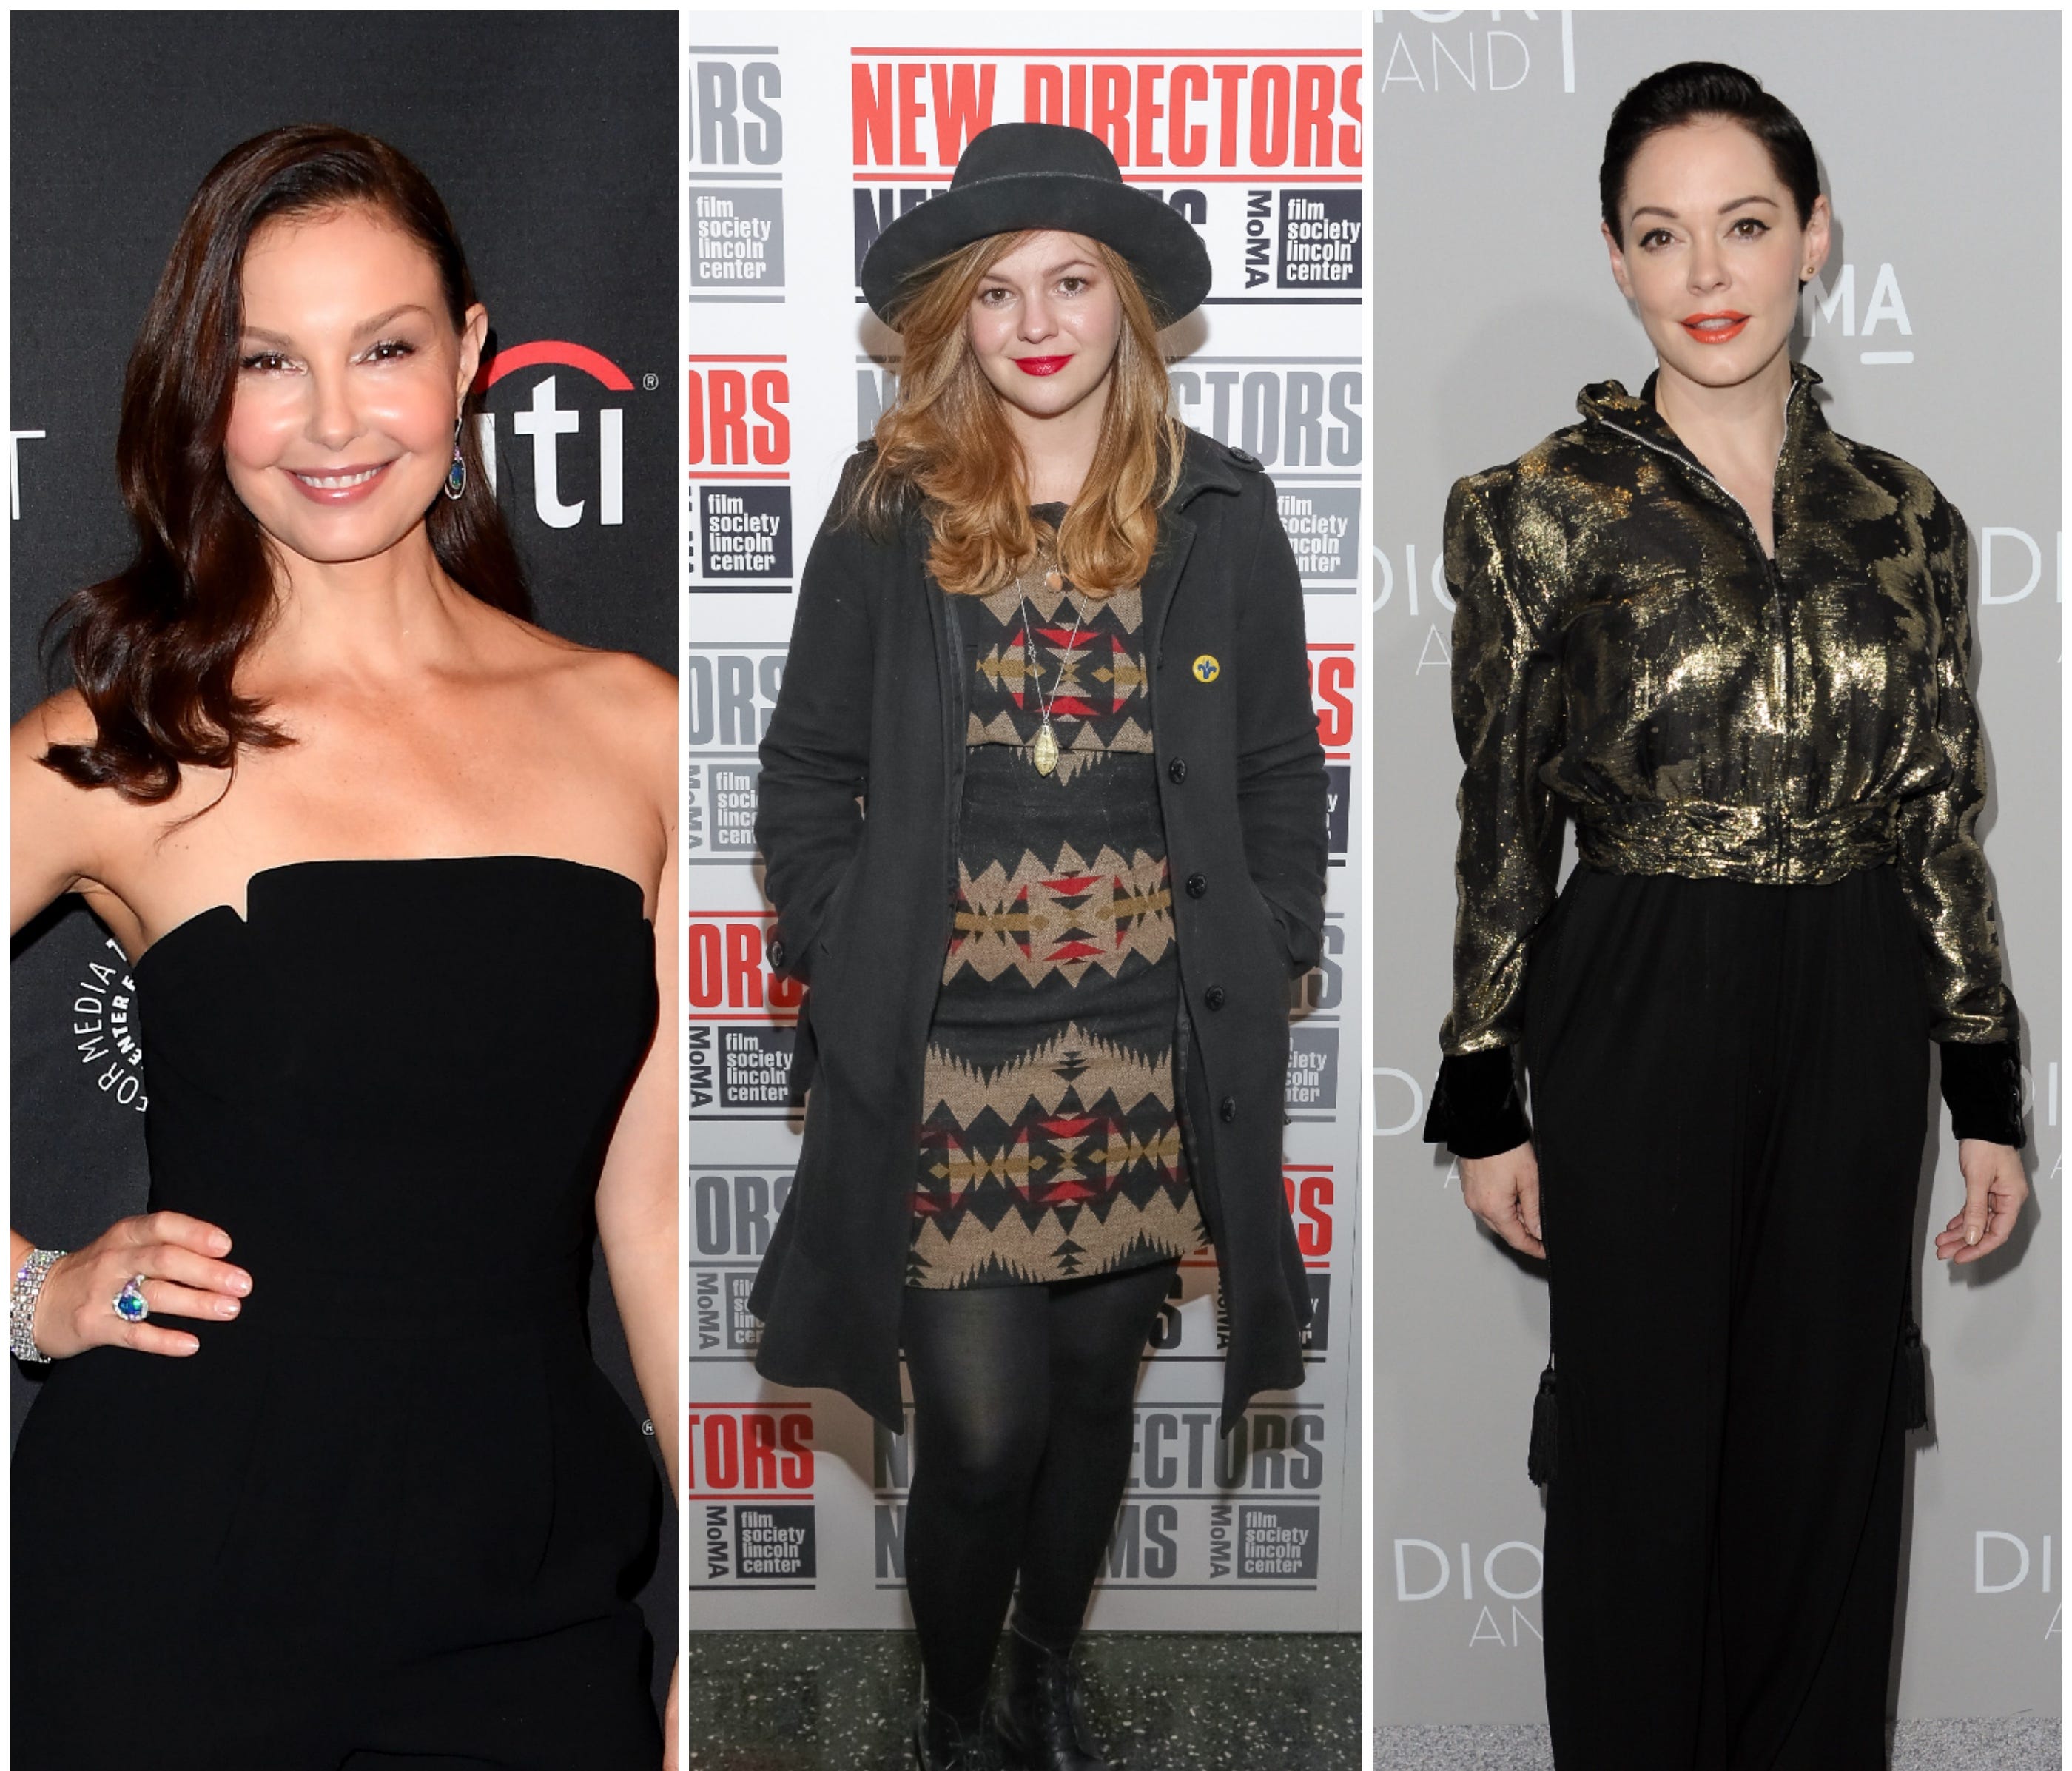 Ashley Judd, left, Amber Tamblyn and Rose McGowan have all been vocal about standing up to sexual harassment in Hollywood.